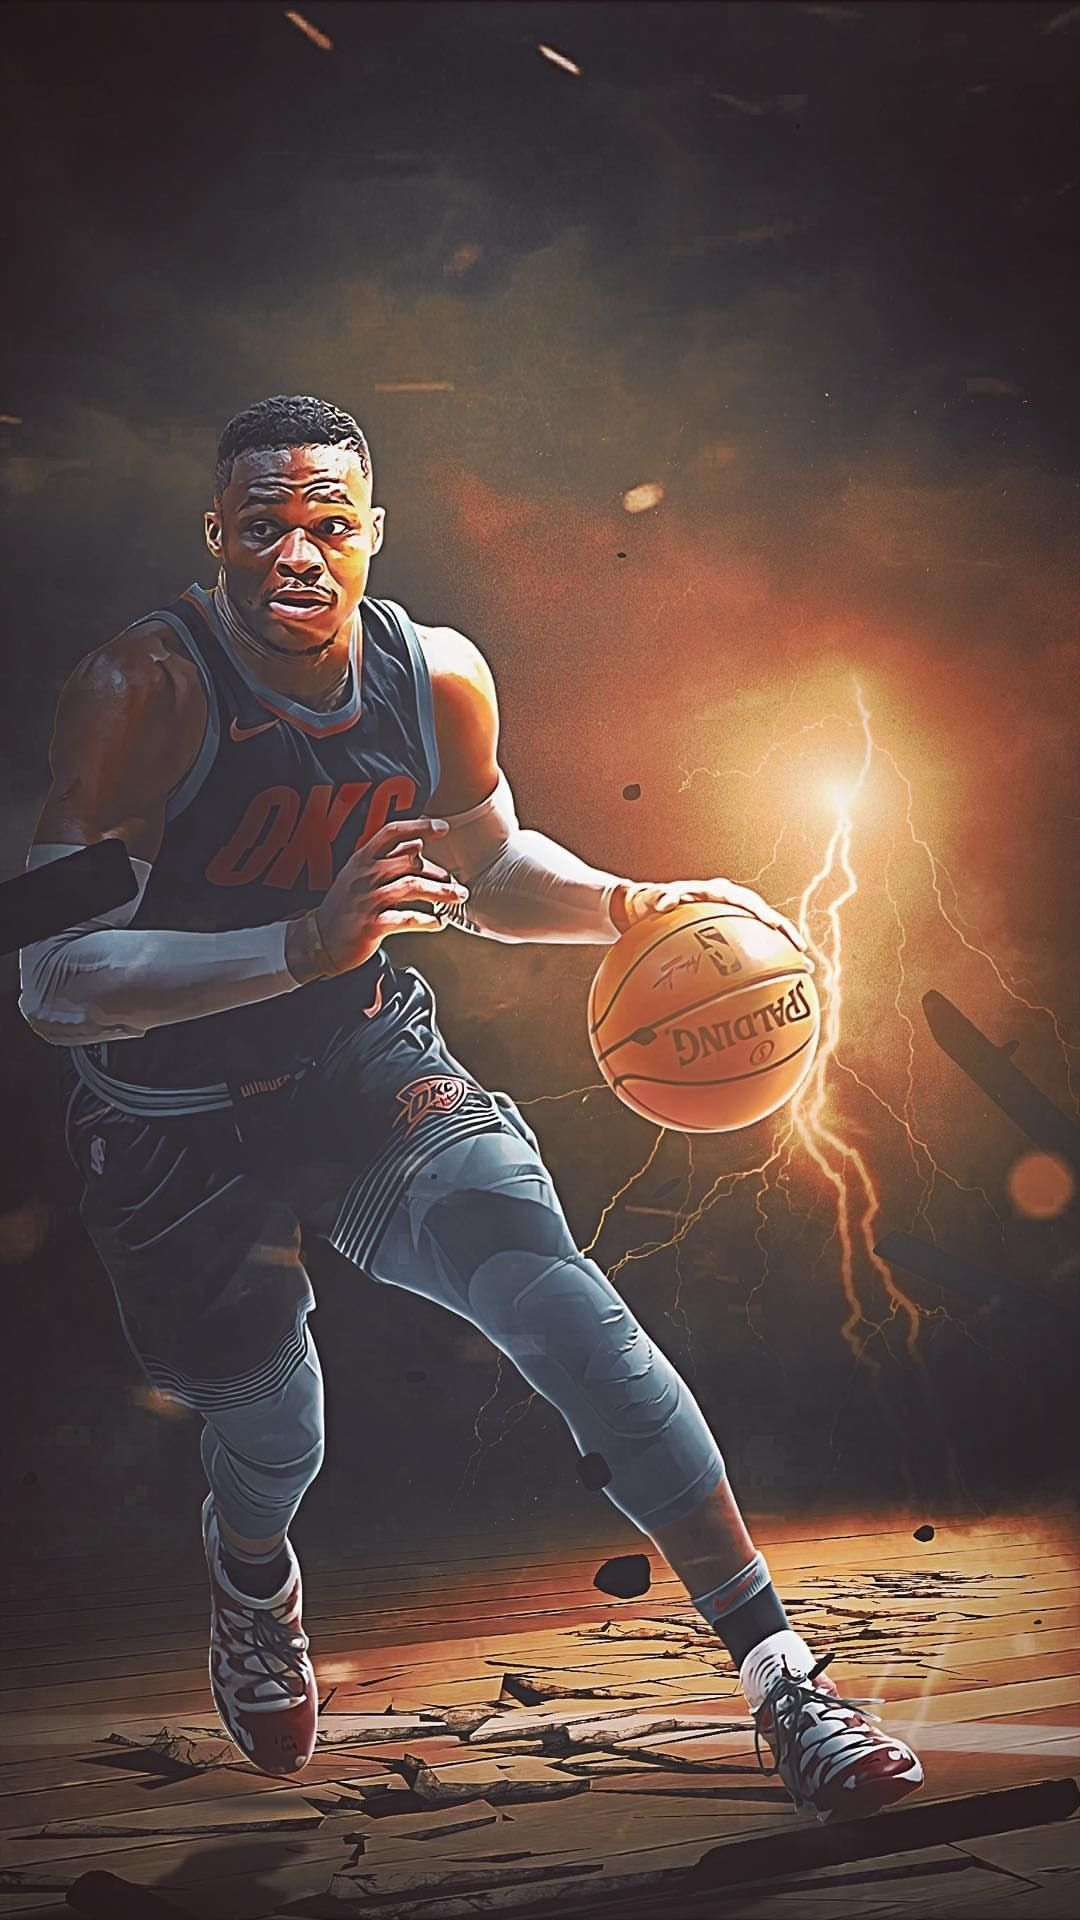 1080x1920 Russell Westbrook Wallpaper for mobile phone, tablet, desktop computer and other devices HD and 4K&acirc;&#128;&brvbar; | Westbrook wallpapers, Russell westbrook wallpaper, Nba artwork